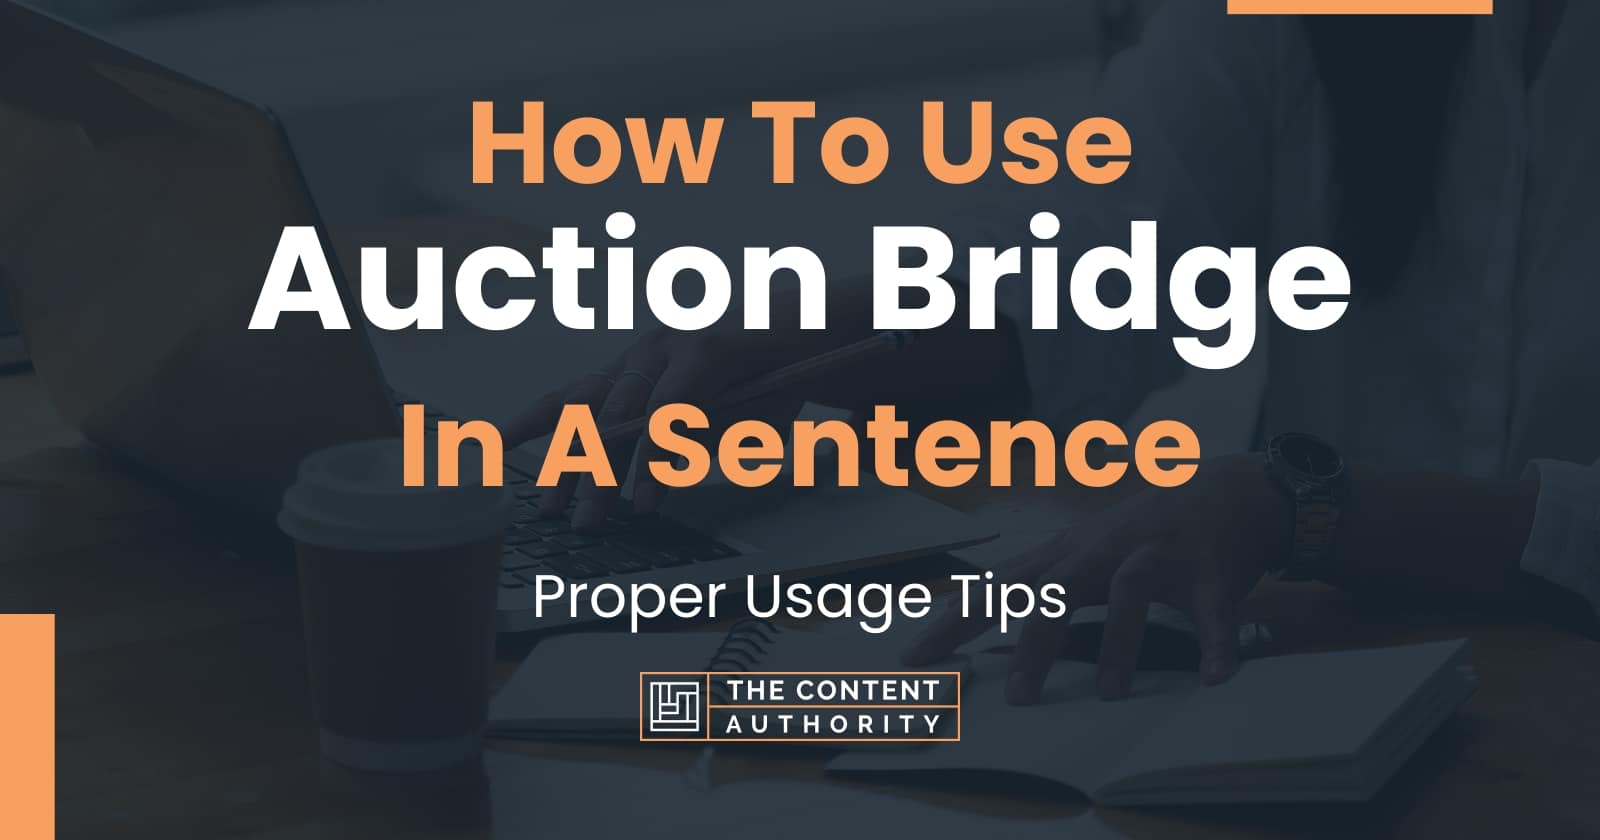 how-to-use-auction-bridge-in-a-sentence-proper-usage-tips